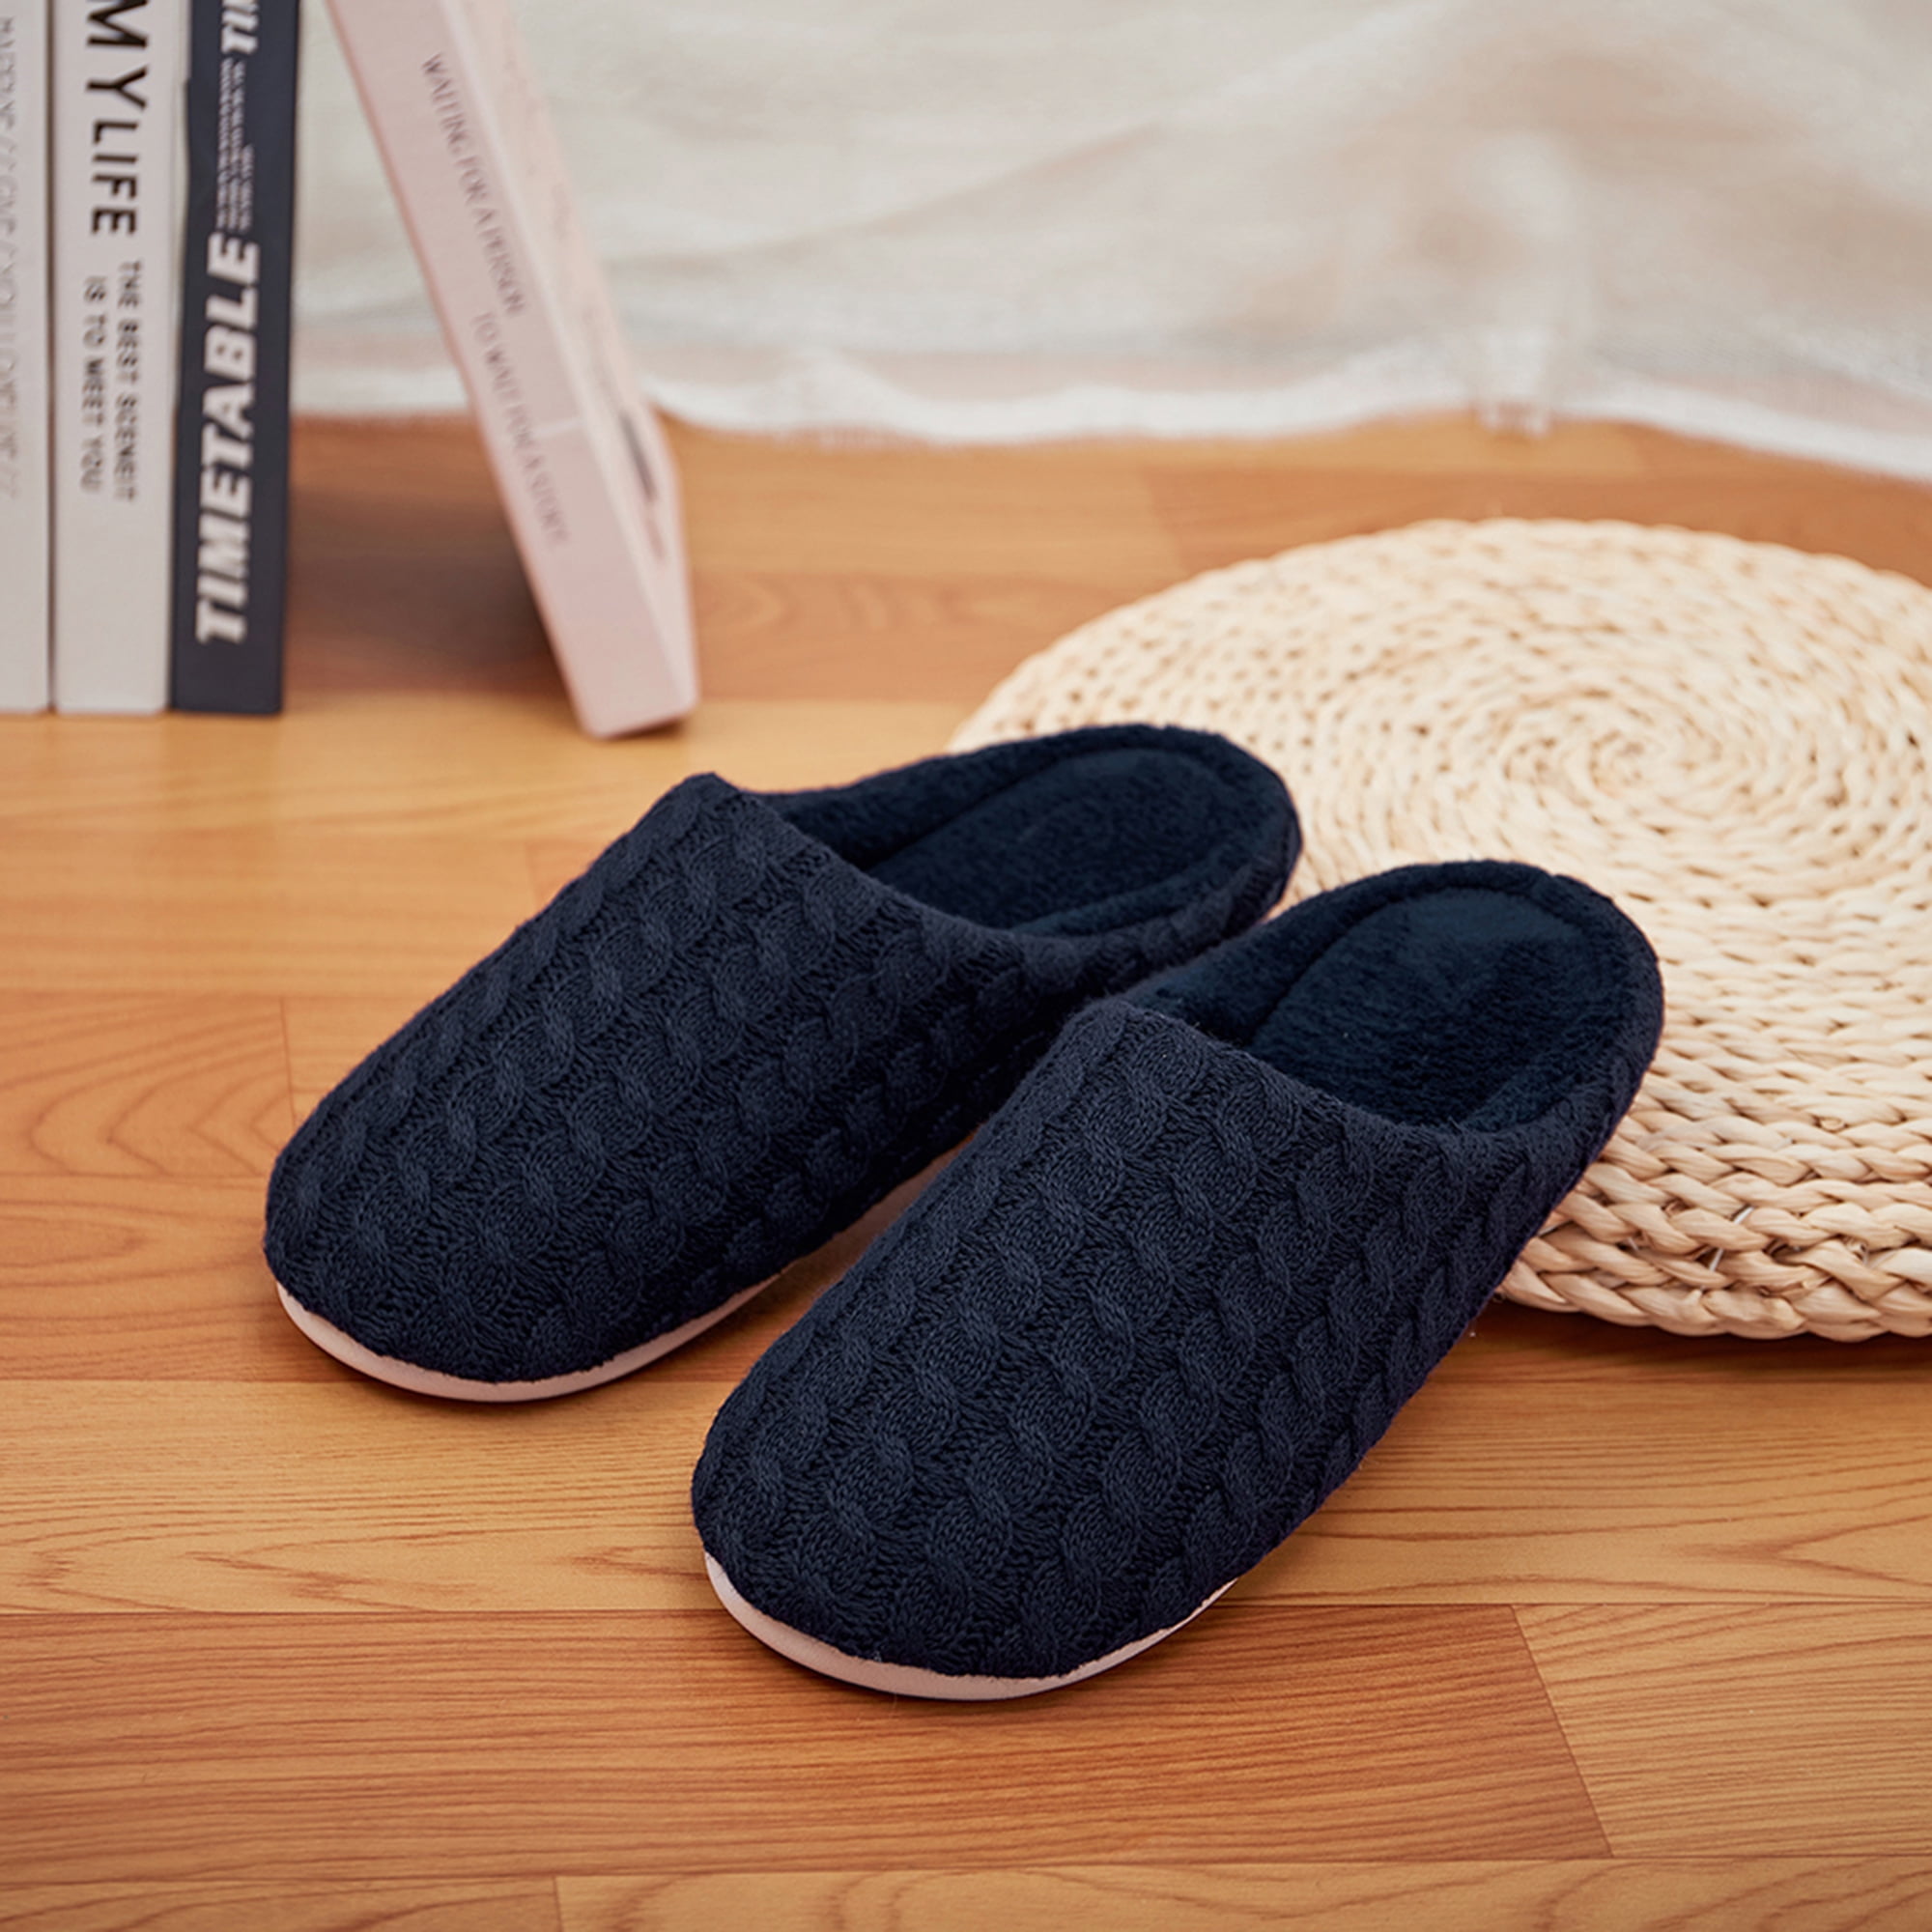 Mens Coolers Slippers Slip On Winter Casual Slippers Shoes Mules Moccasins Sizes 